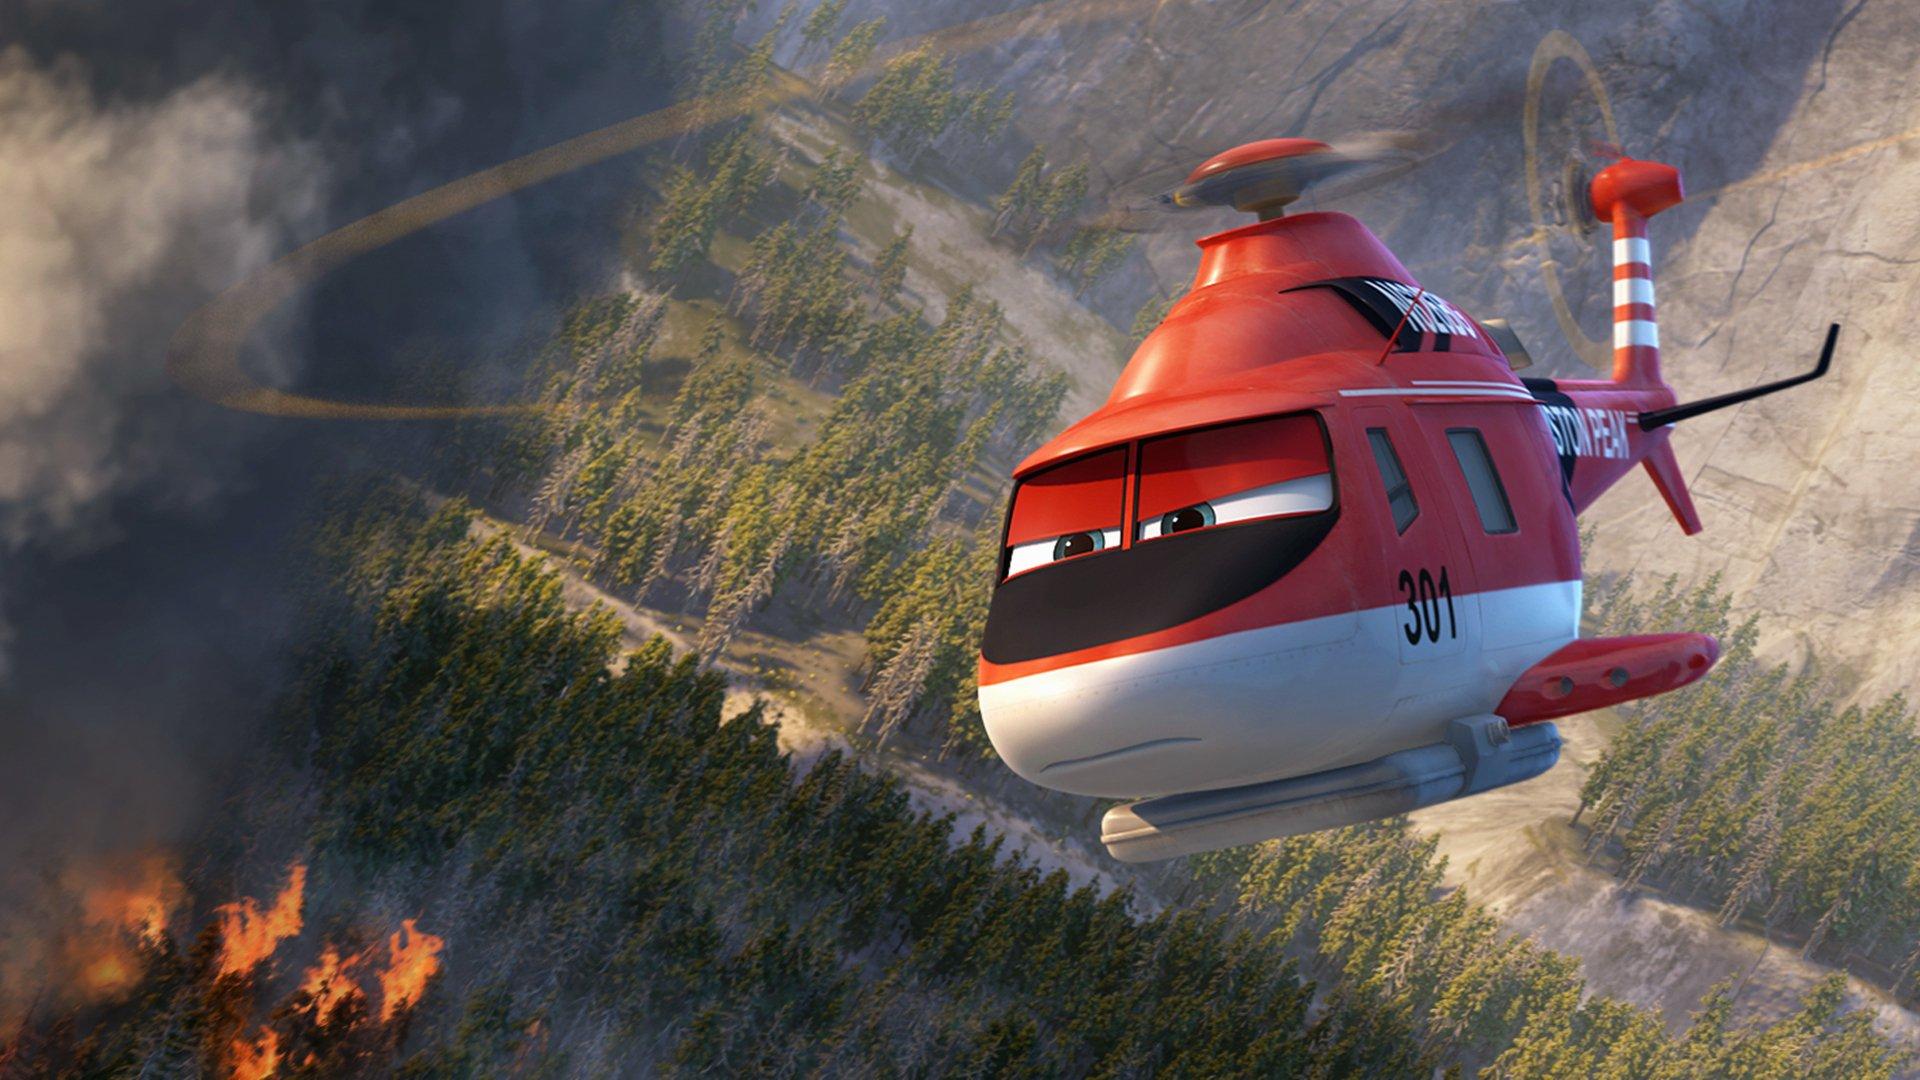 Planes: Fire & Rescue HD Wallpaper. Background Image